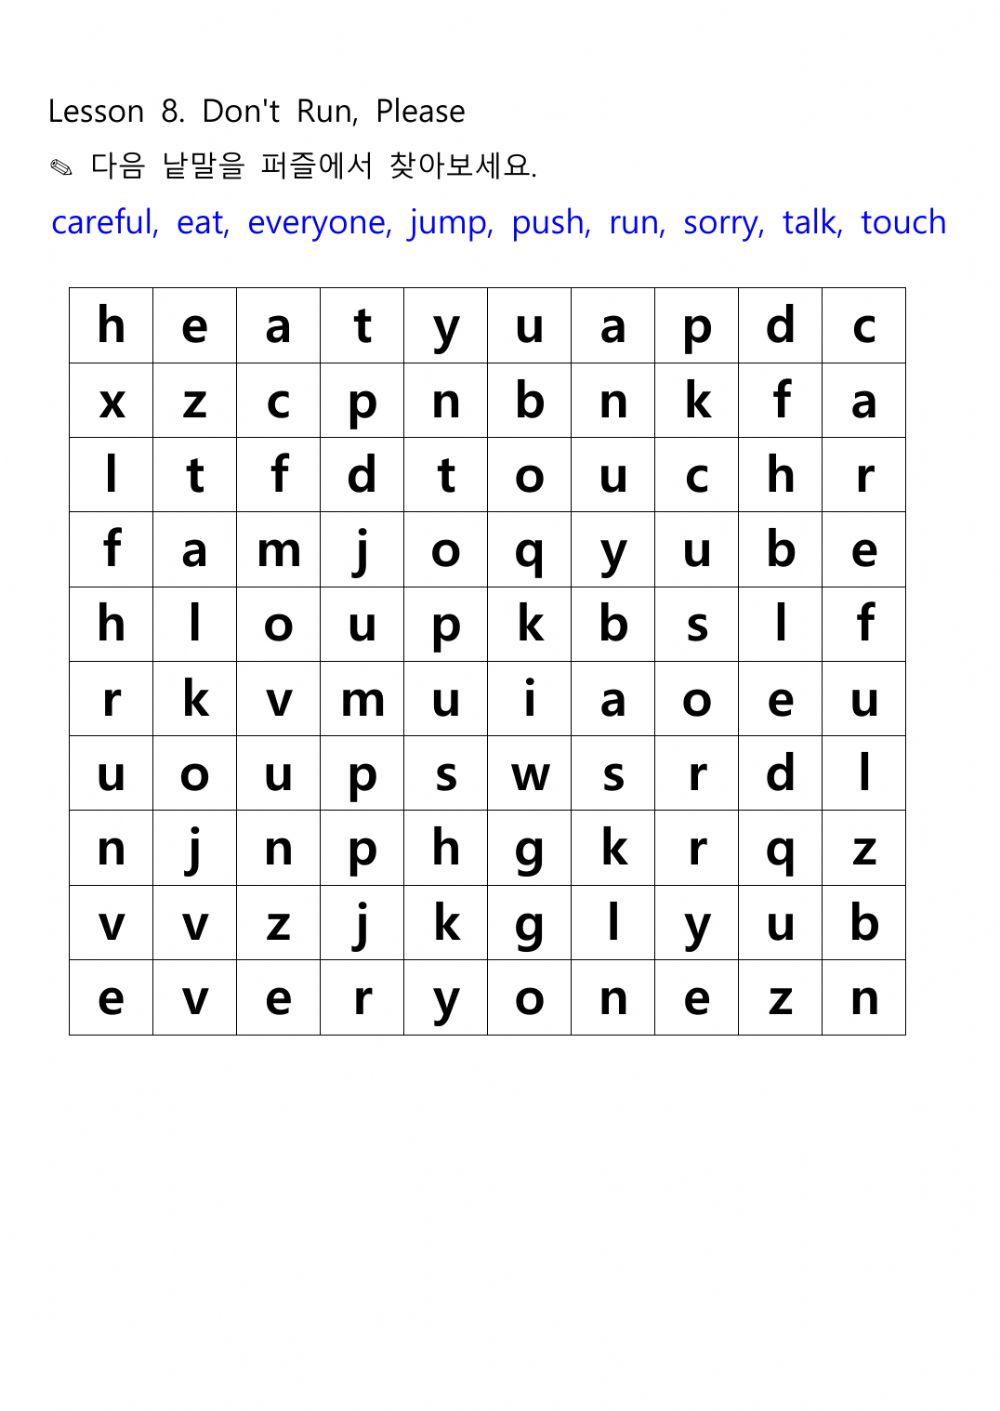 Lesson 8 wordsearch